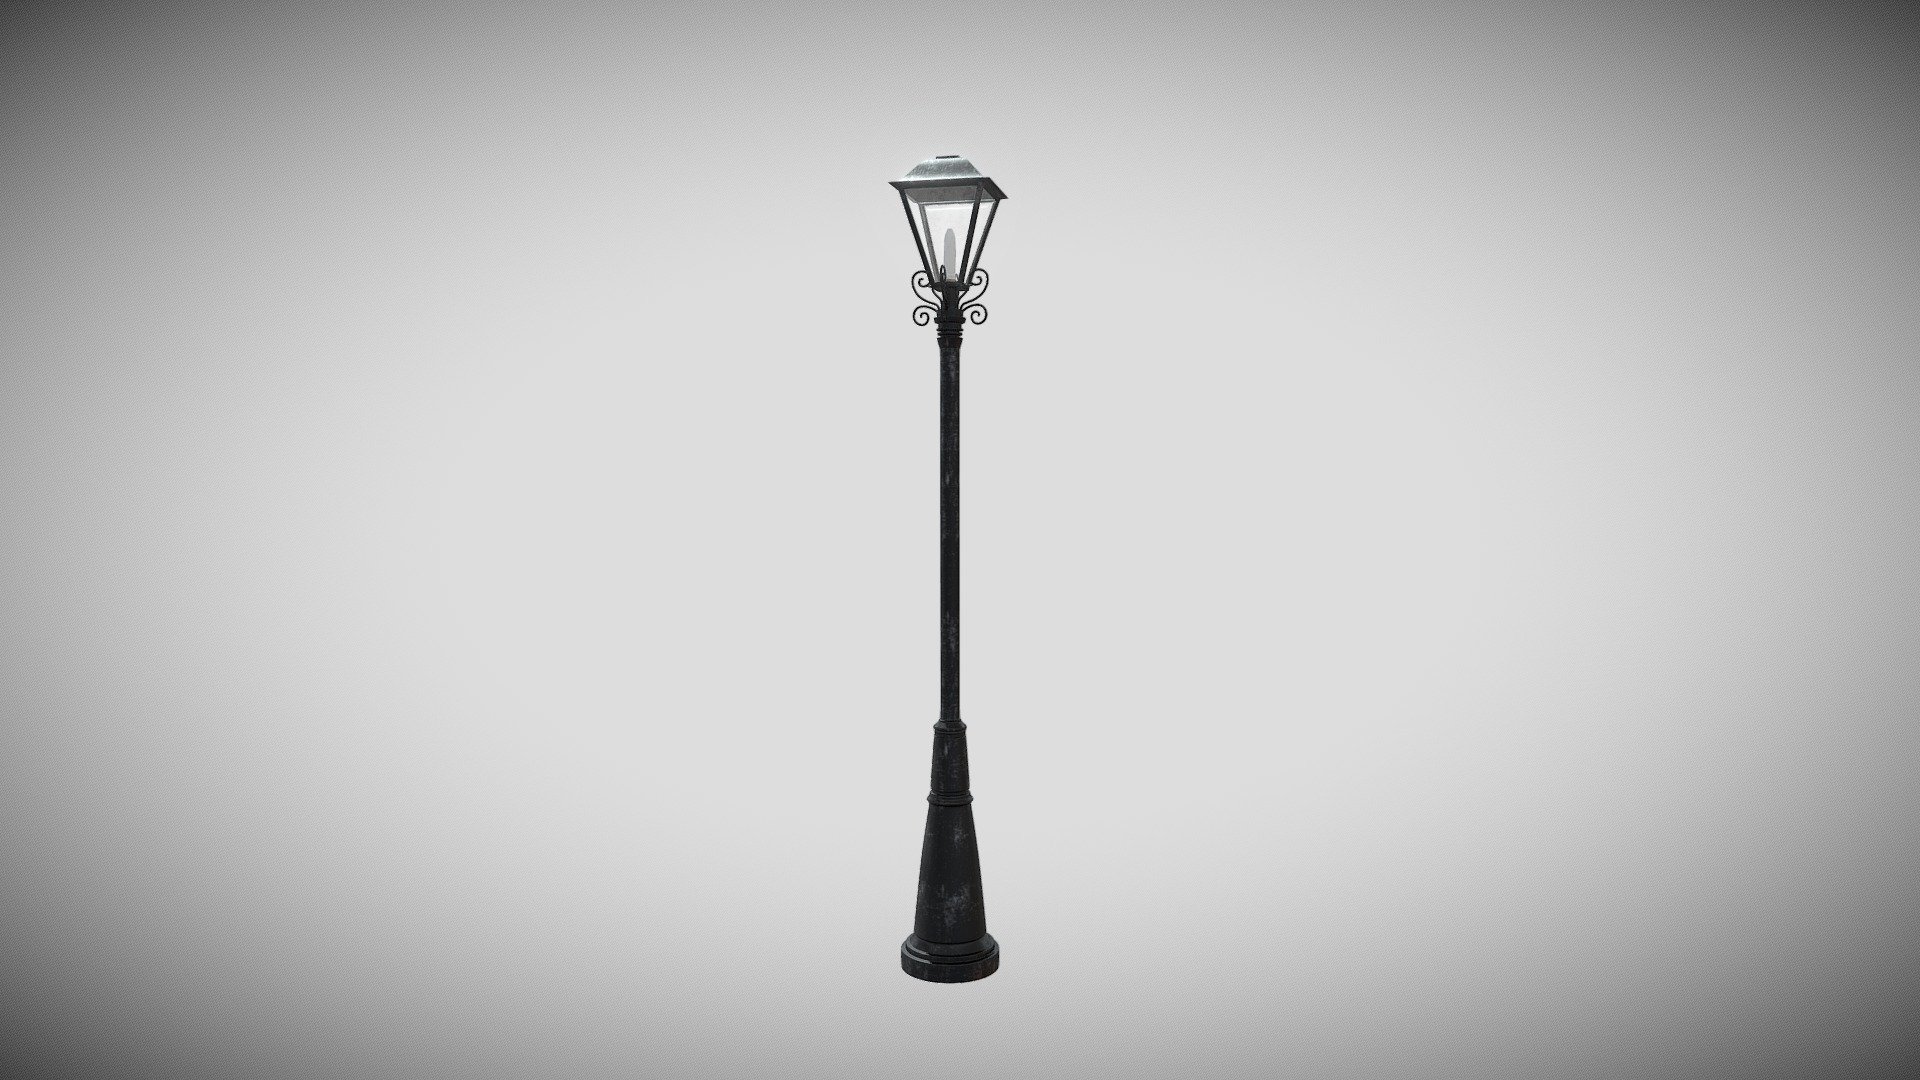 Street light 3d Model

UV Unwrapped, Non Overlapping

2048px Textures

3 file formats

blend file
 - Street Light 3d Model - 3D model by Sridhar M (@Sridhar_m) 3d model